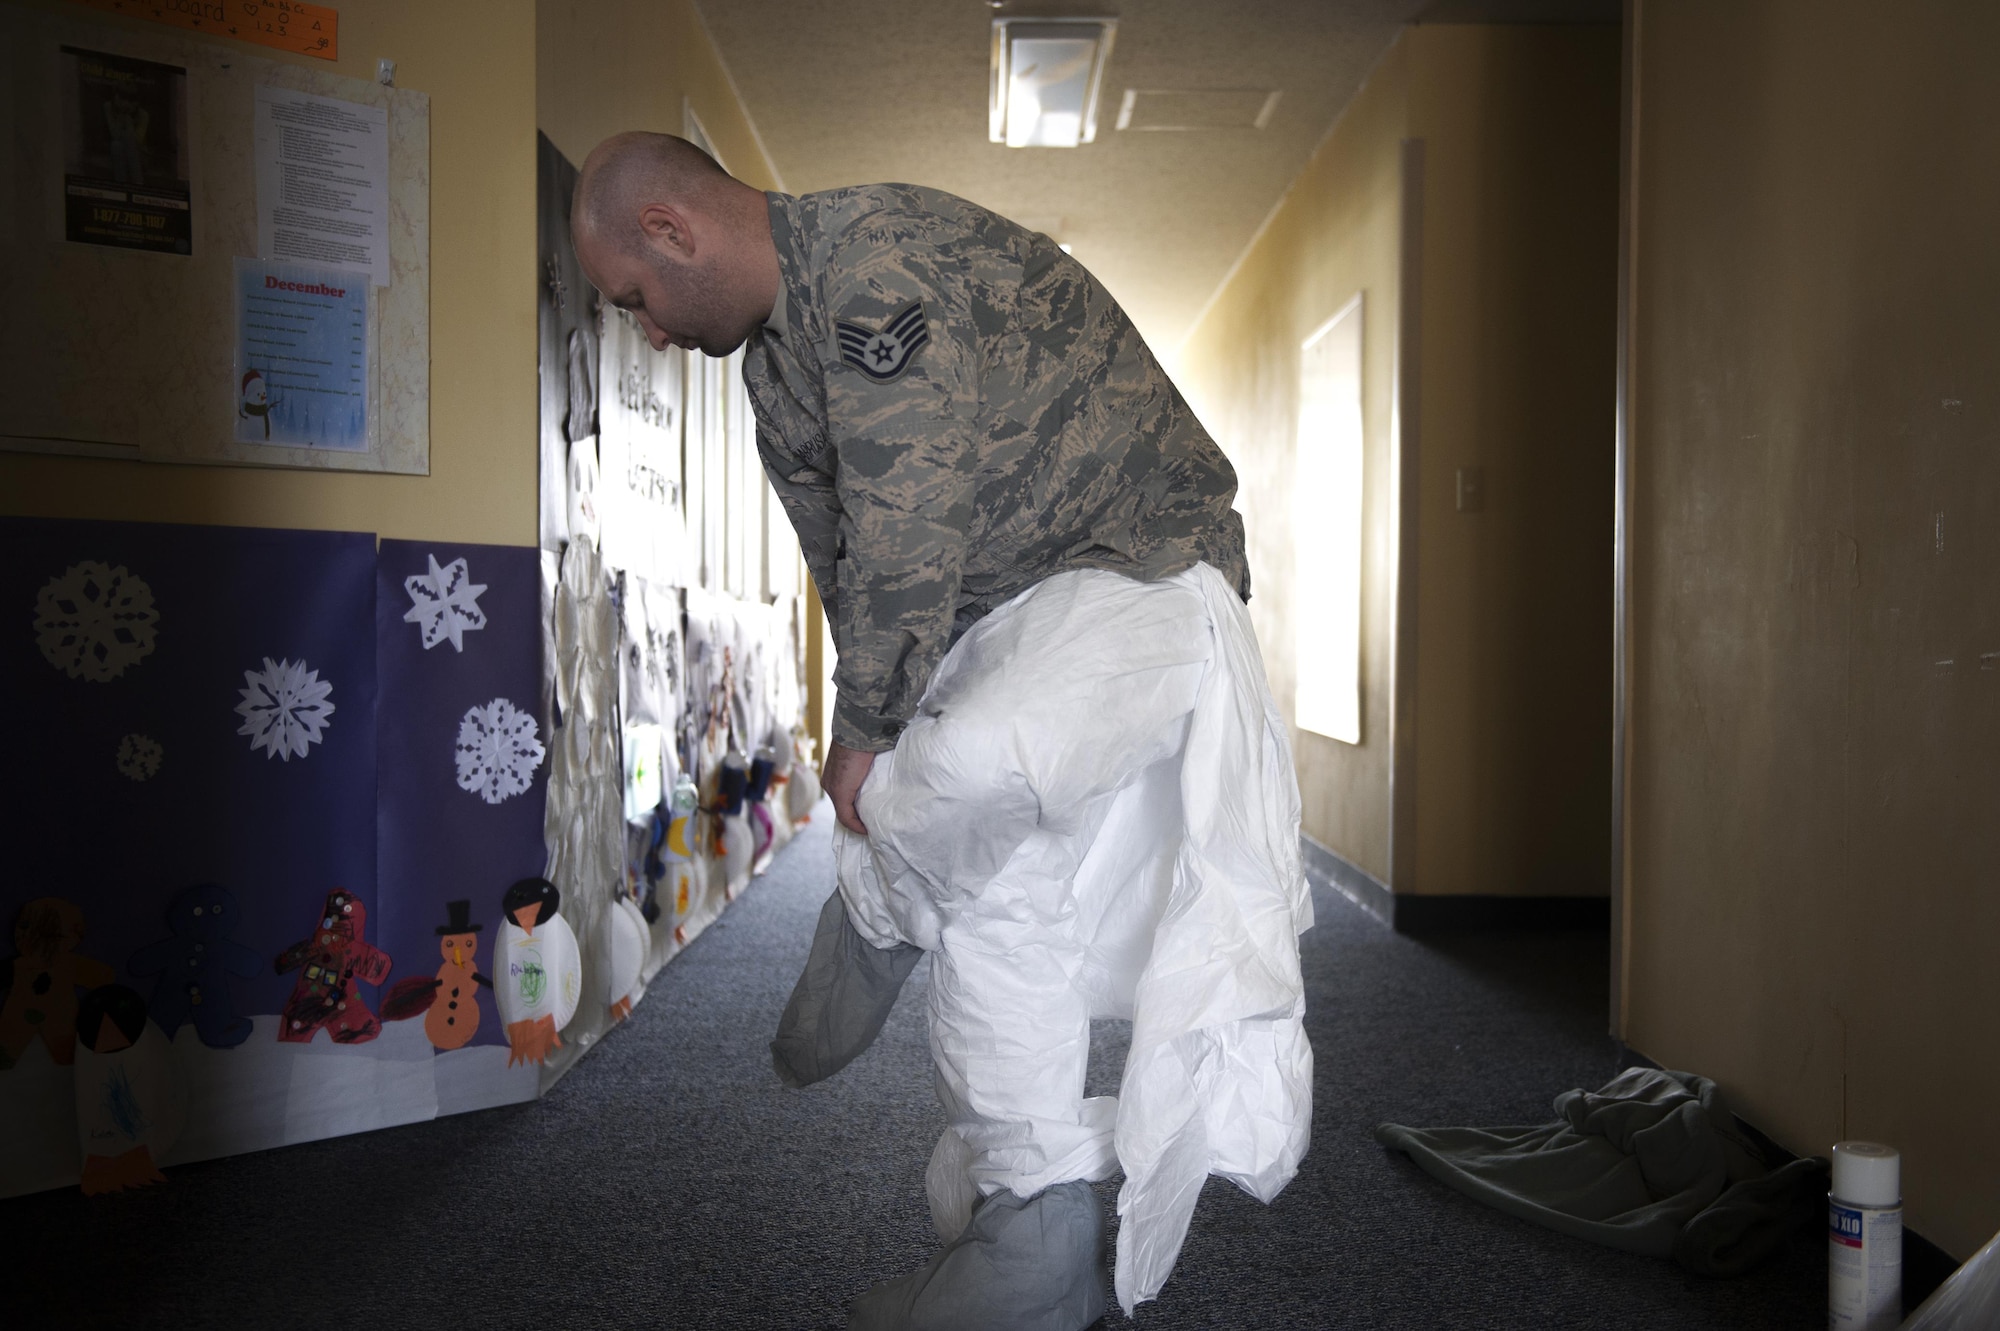 Staff Sgt. Brandon Cenarrusa, a 374th Civil Engineer Squadron pest management craftsman, dons a protective suit before entering the crawlspace at Yokota Air Base, Japan, Jan. 6, 2016. The 374th CES utilize preventative and immediate response maintenance practices to ensure that facilities remain pest free. (U.S. Air Force photo/Airman 1st Class Delano Scott)